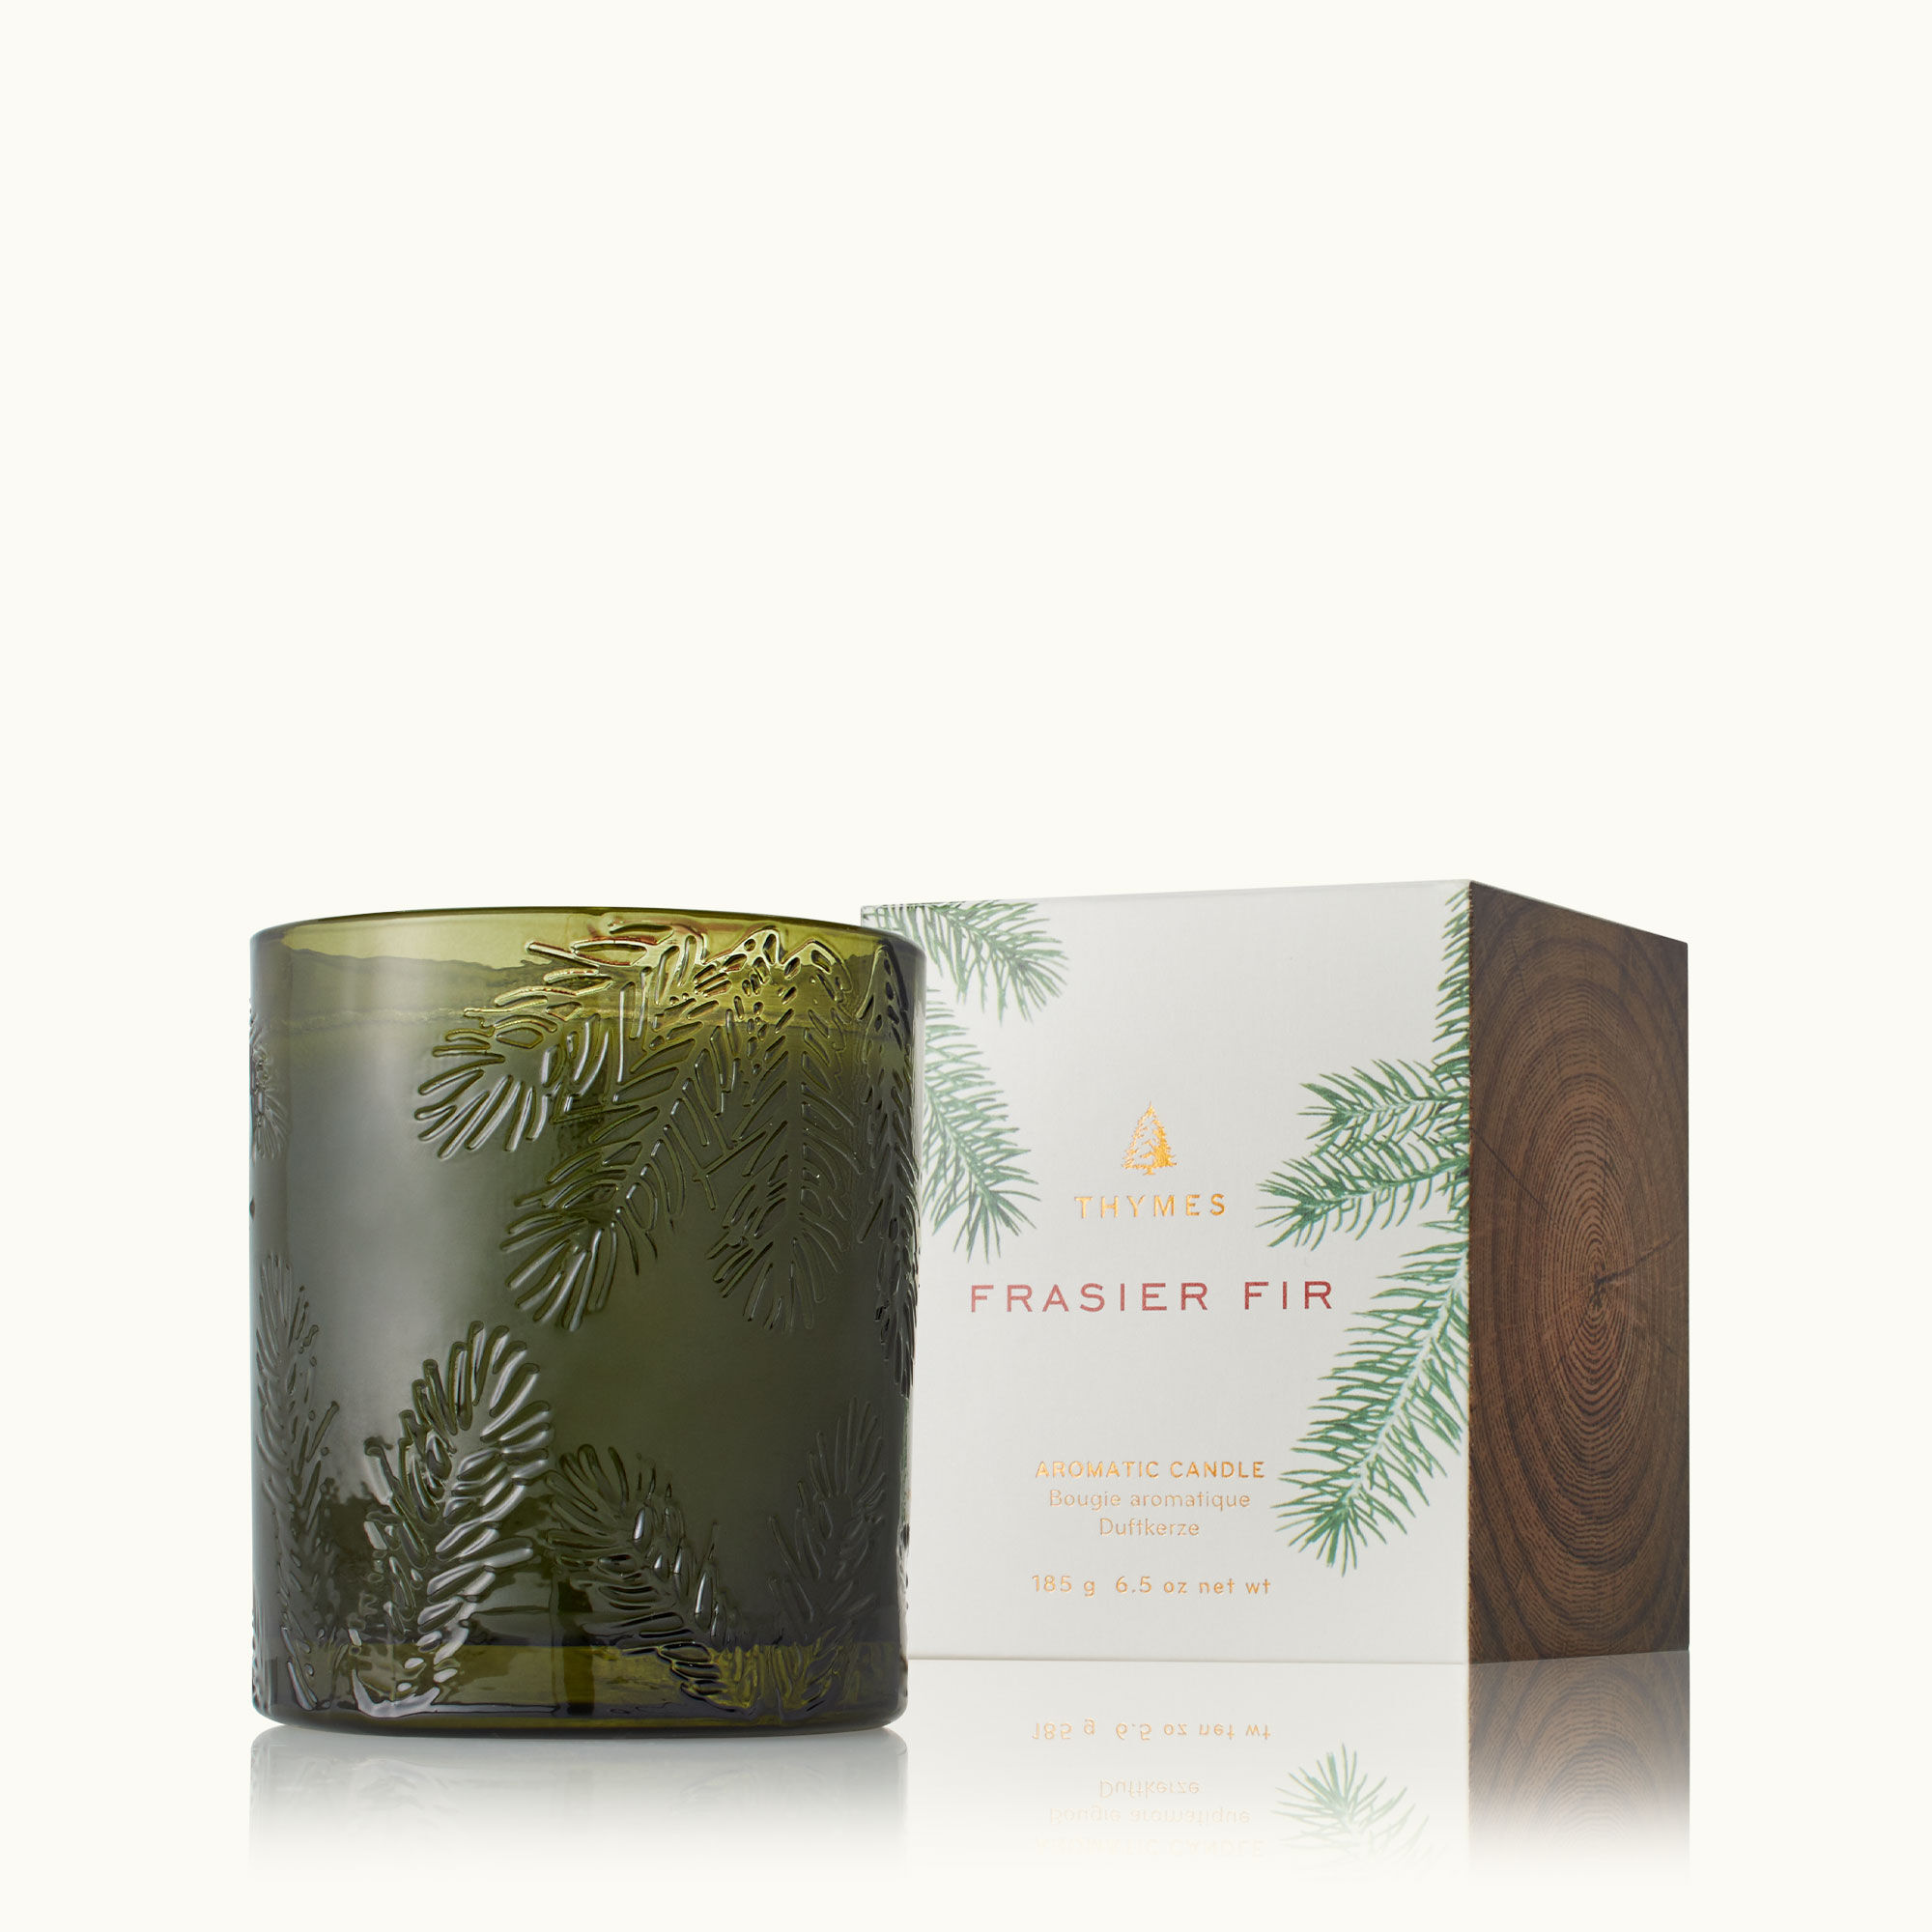 THYMES Frasier Fir Small 2 oz Green Glass Votive Candle Made in the USA 